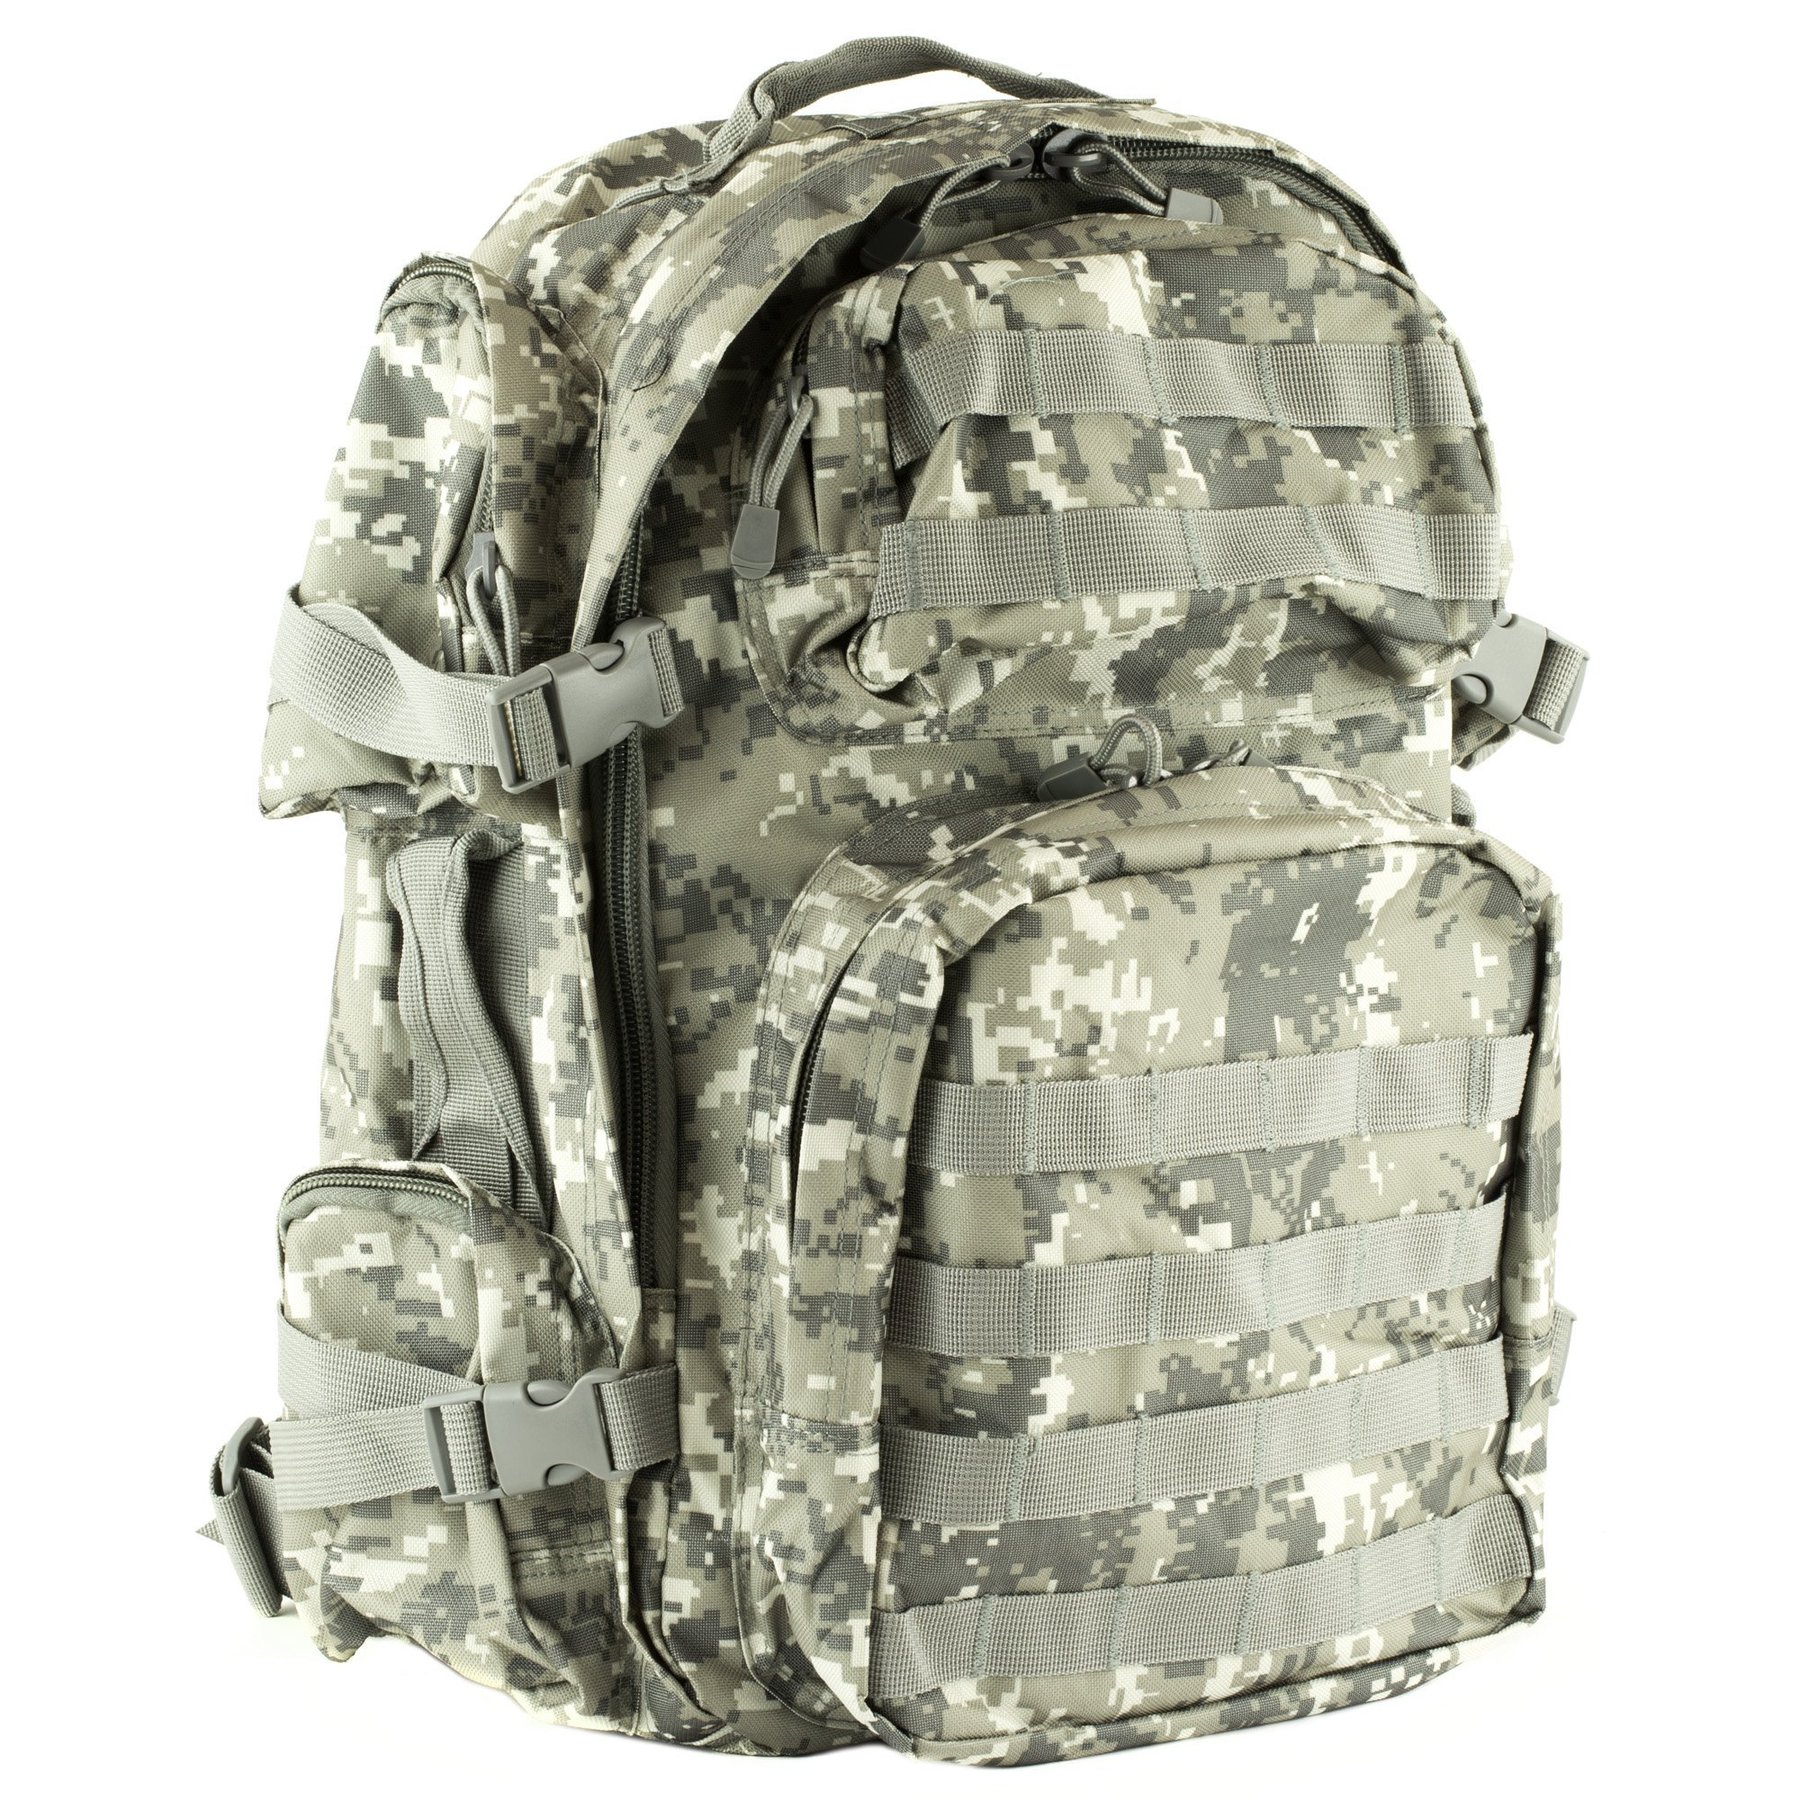 NCStar tactical backpack